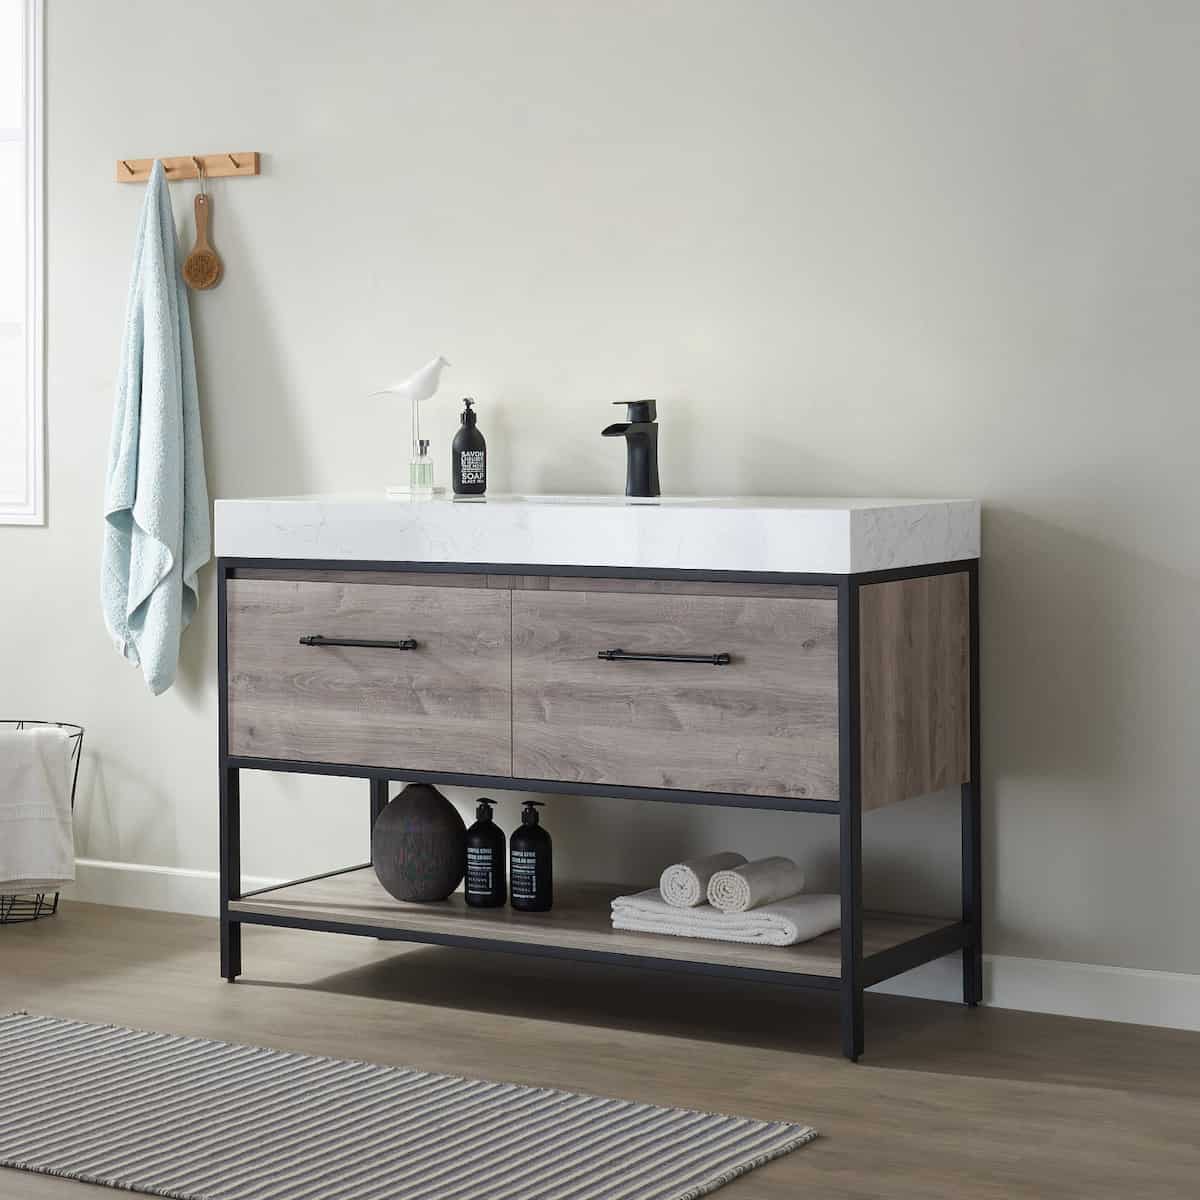 Vinnova Palma 48 Inch Freestanding Single Vanity In Mexican Oak with White Composite Grain Stone Countertop Without Mirror Side 701248-MXO-GW-NM